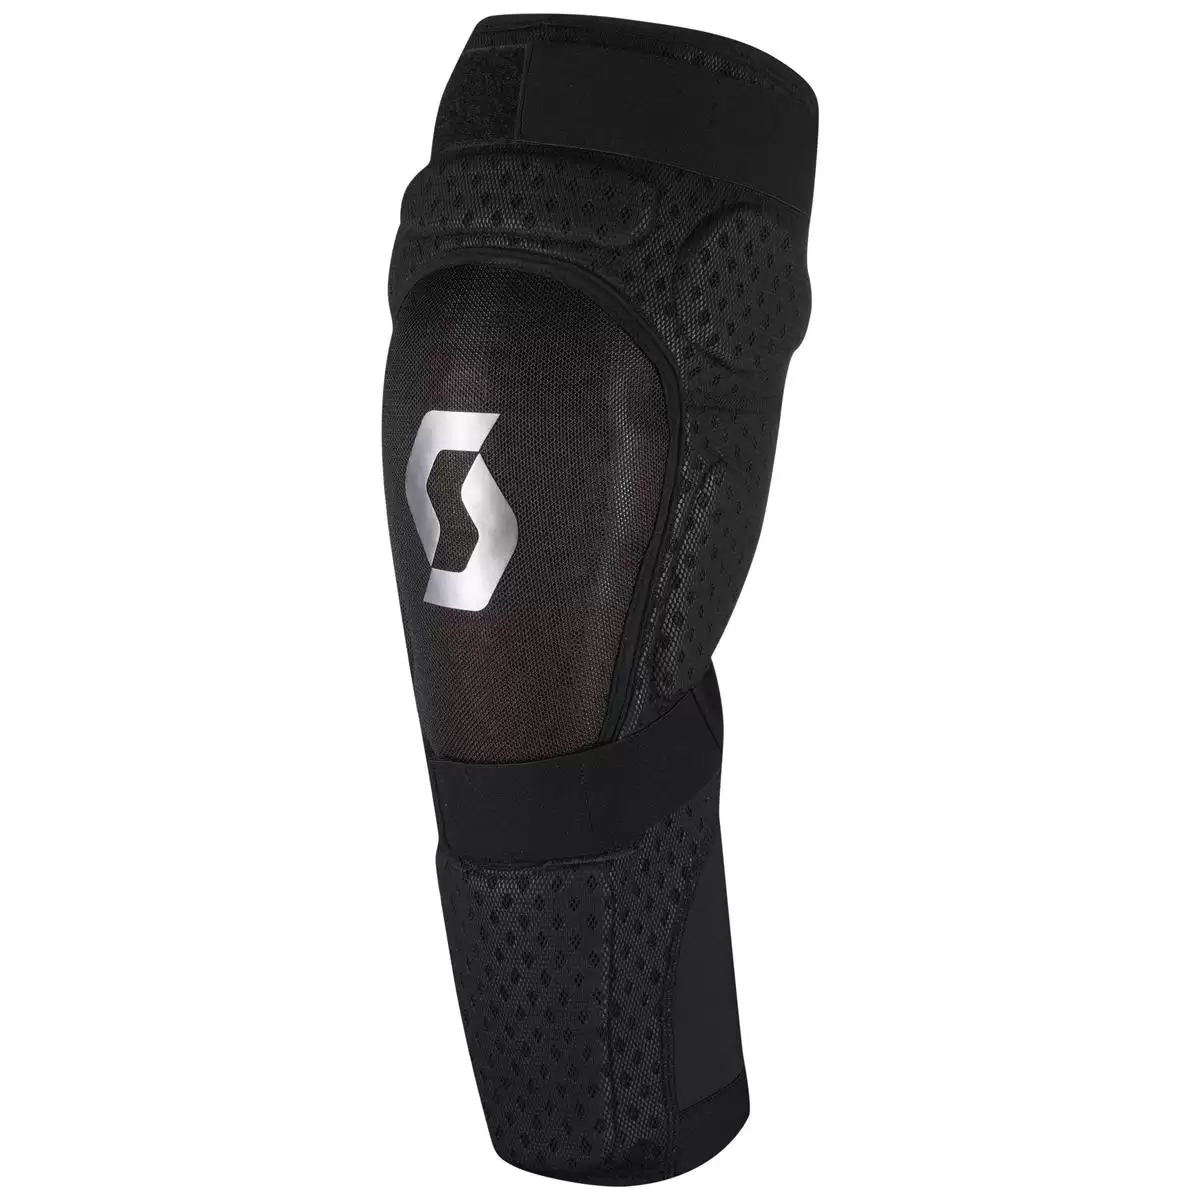 Knee pads Softcon 2 Black/Grey - Size L - image